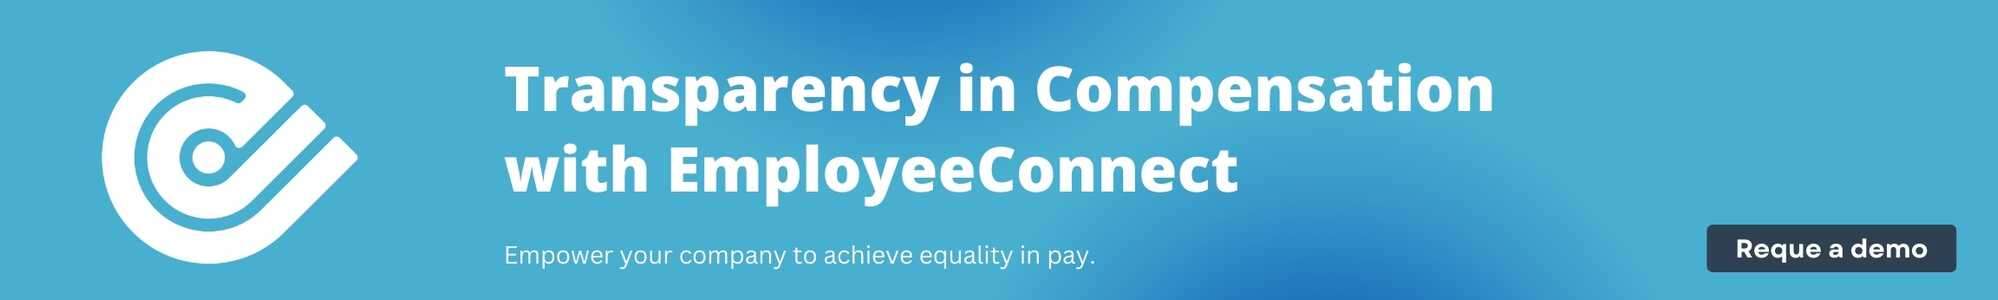 Transparency in Compensation with EmployeeConnect